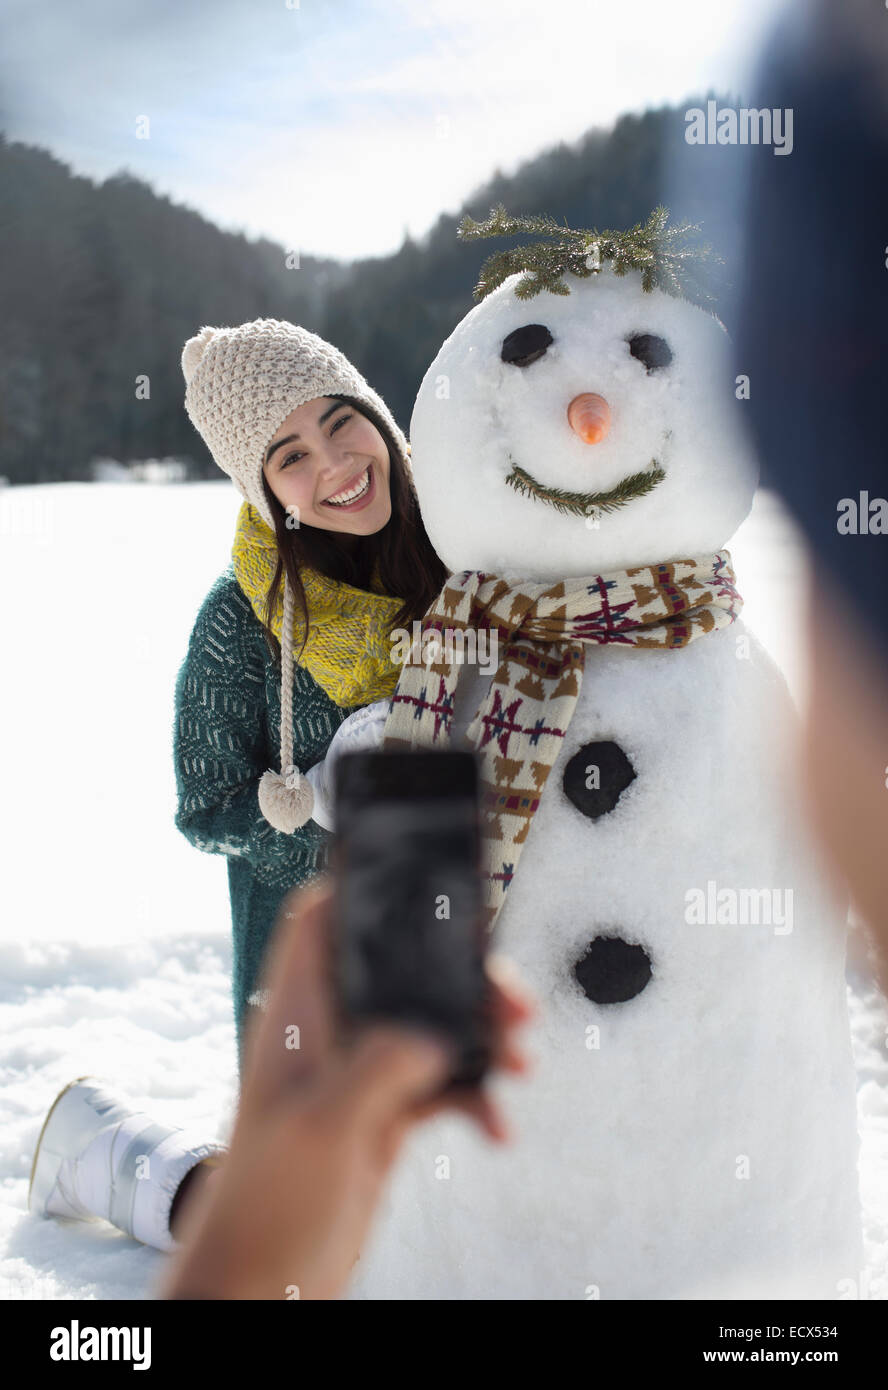 Man photographing woman with snowman Stock Photo